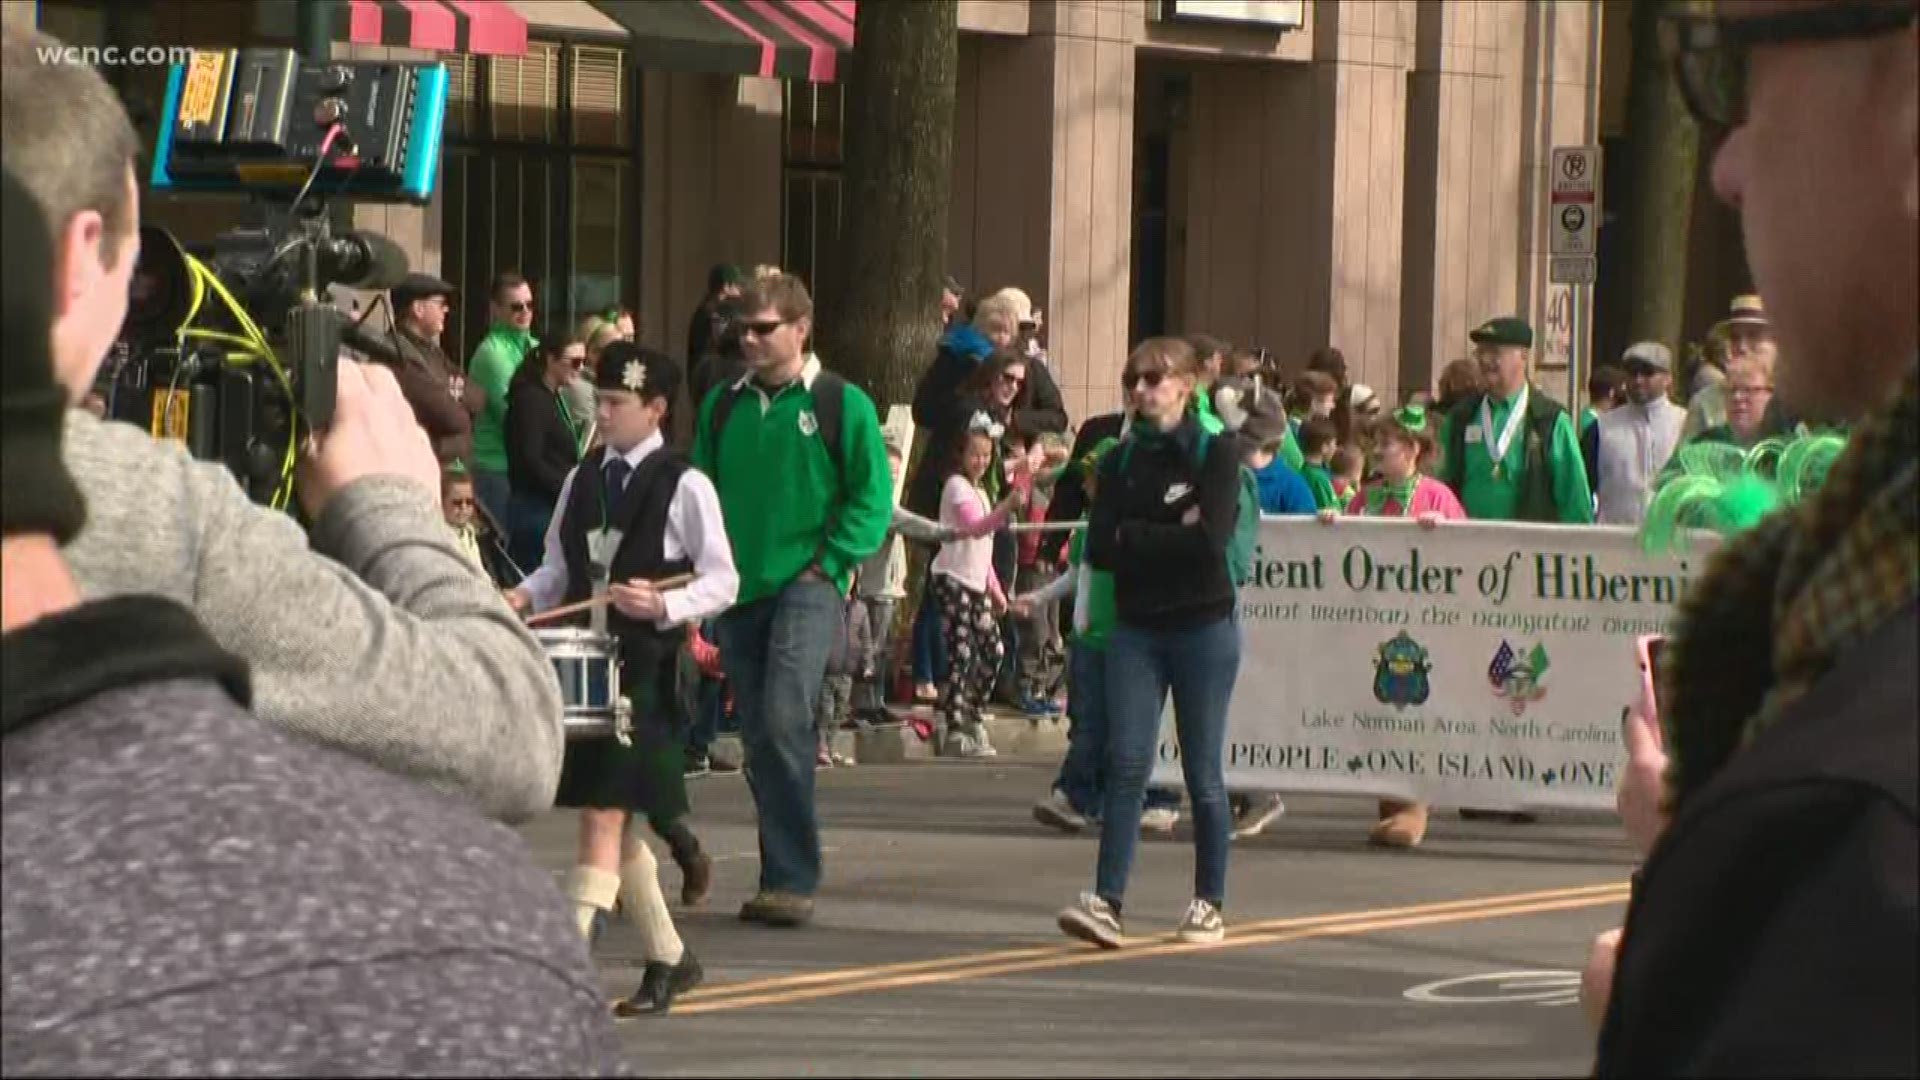 Hundreds of people came out to see the parade through uptown Charlotte Saturday morning.